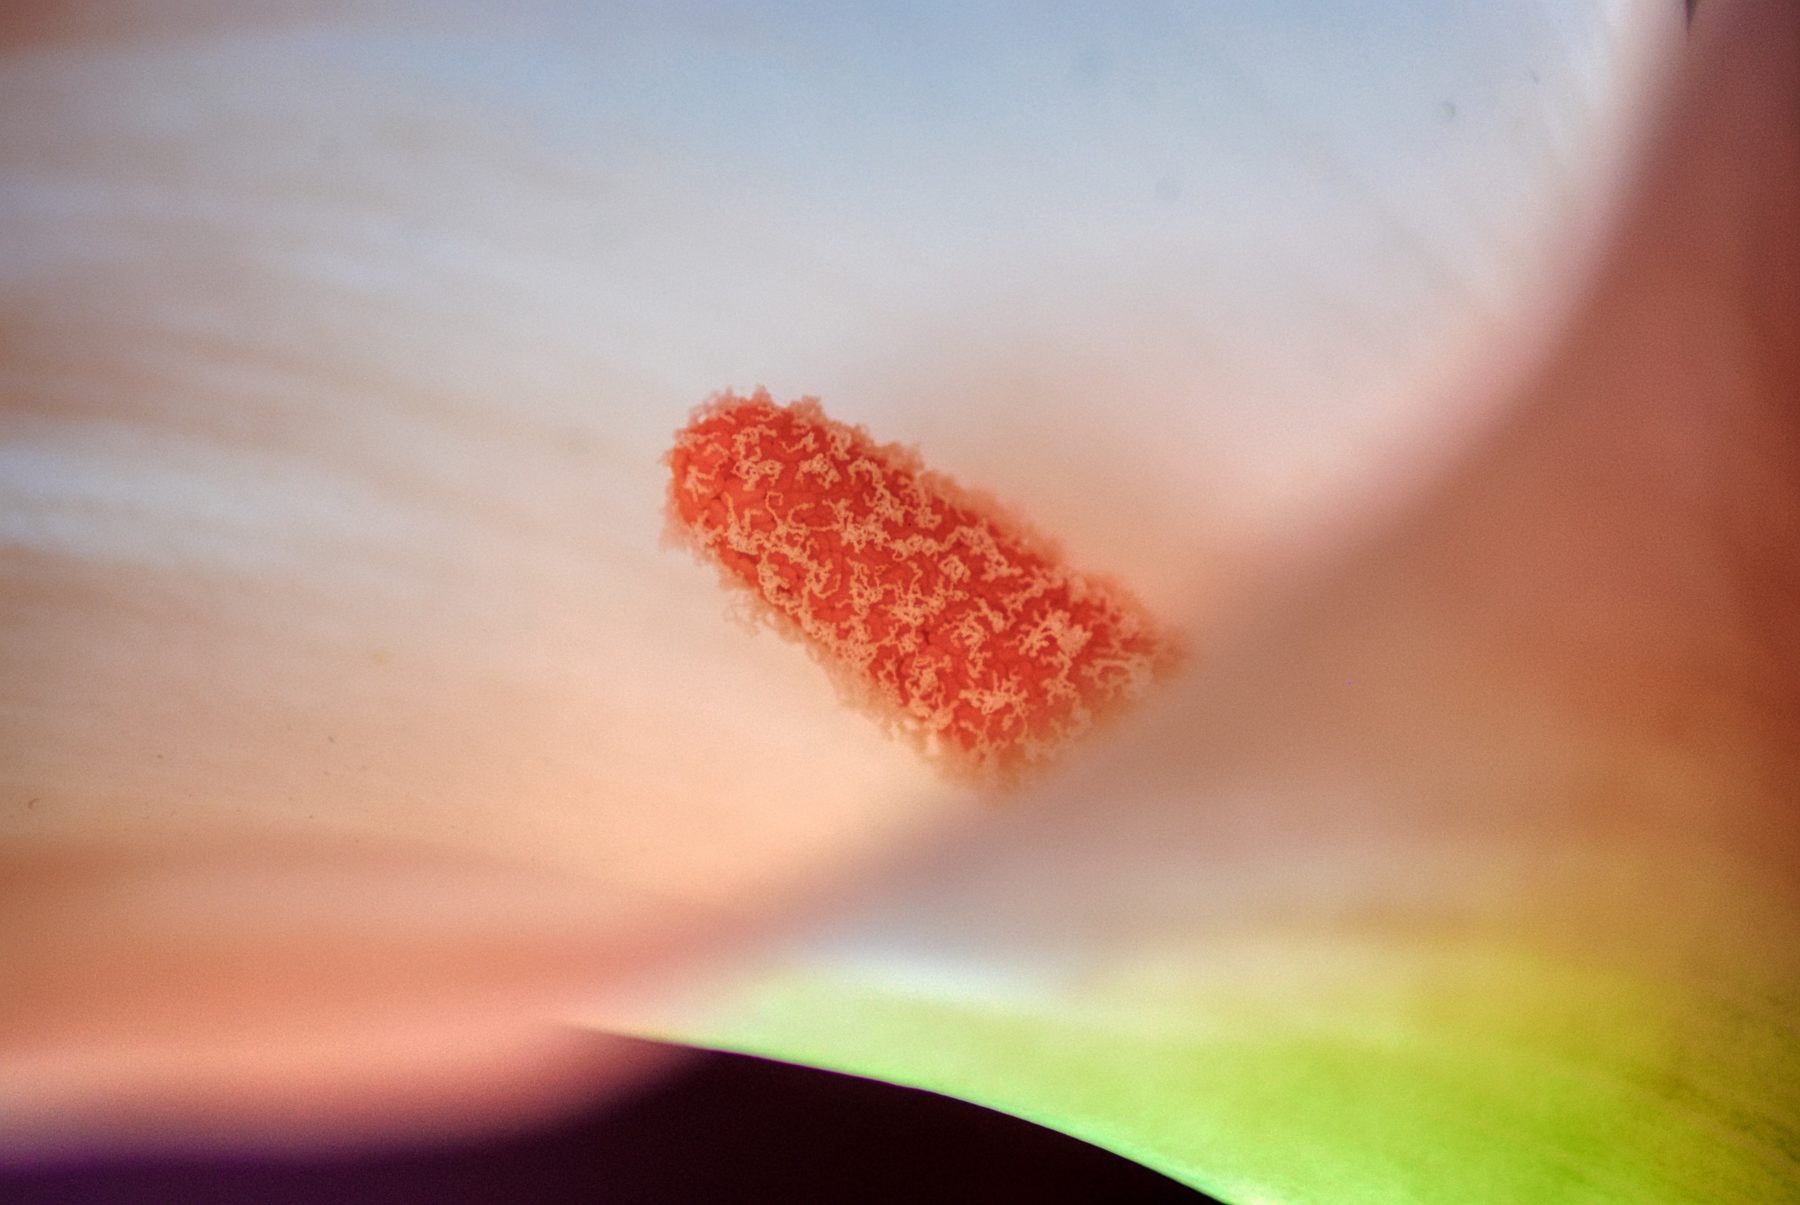 A close up image of pollen on a flower.